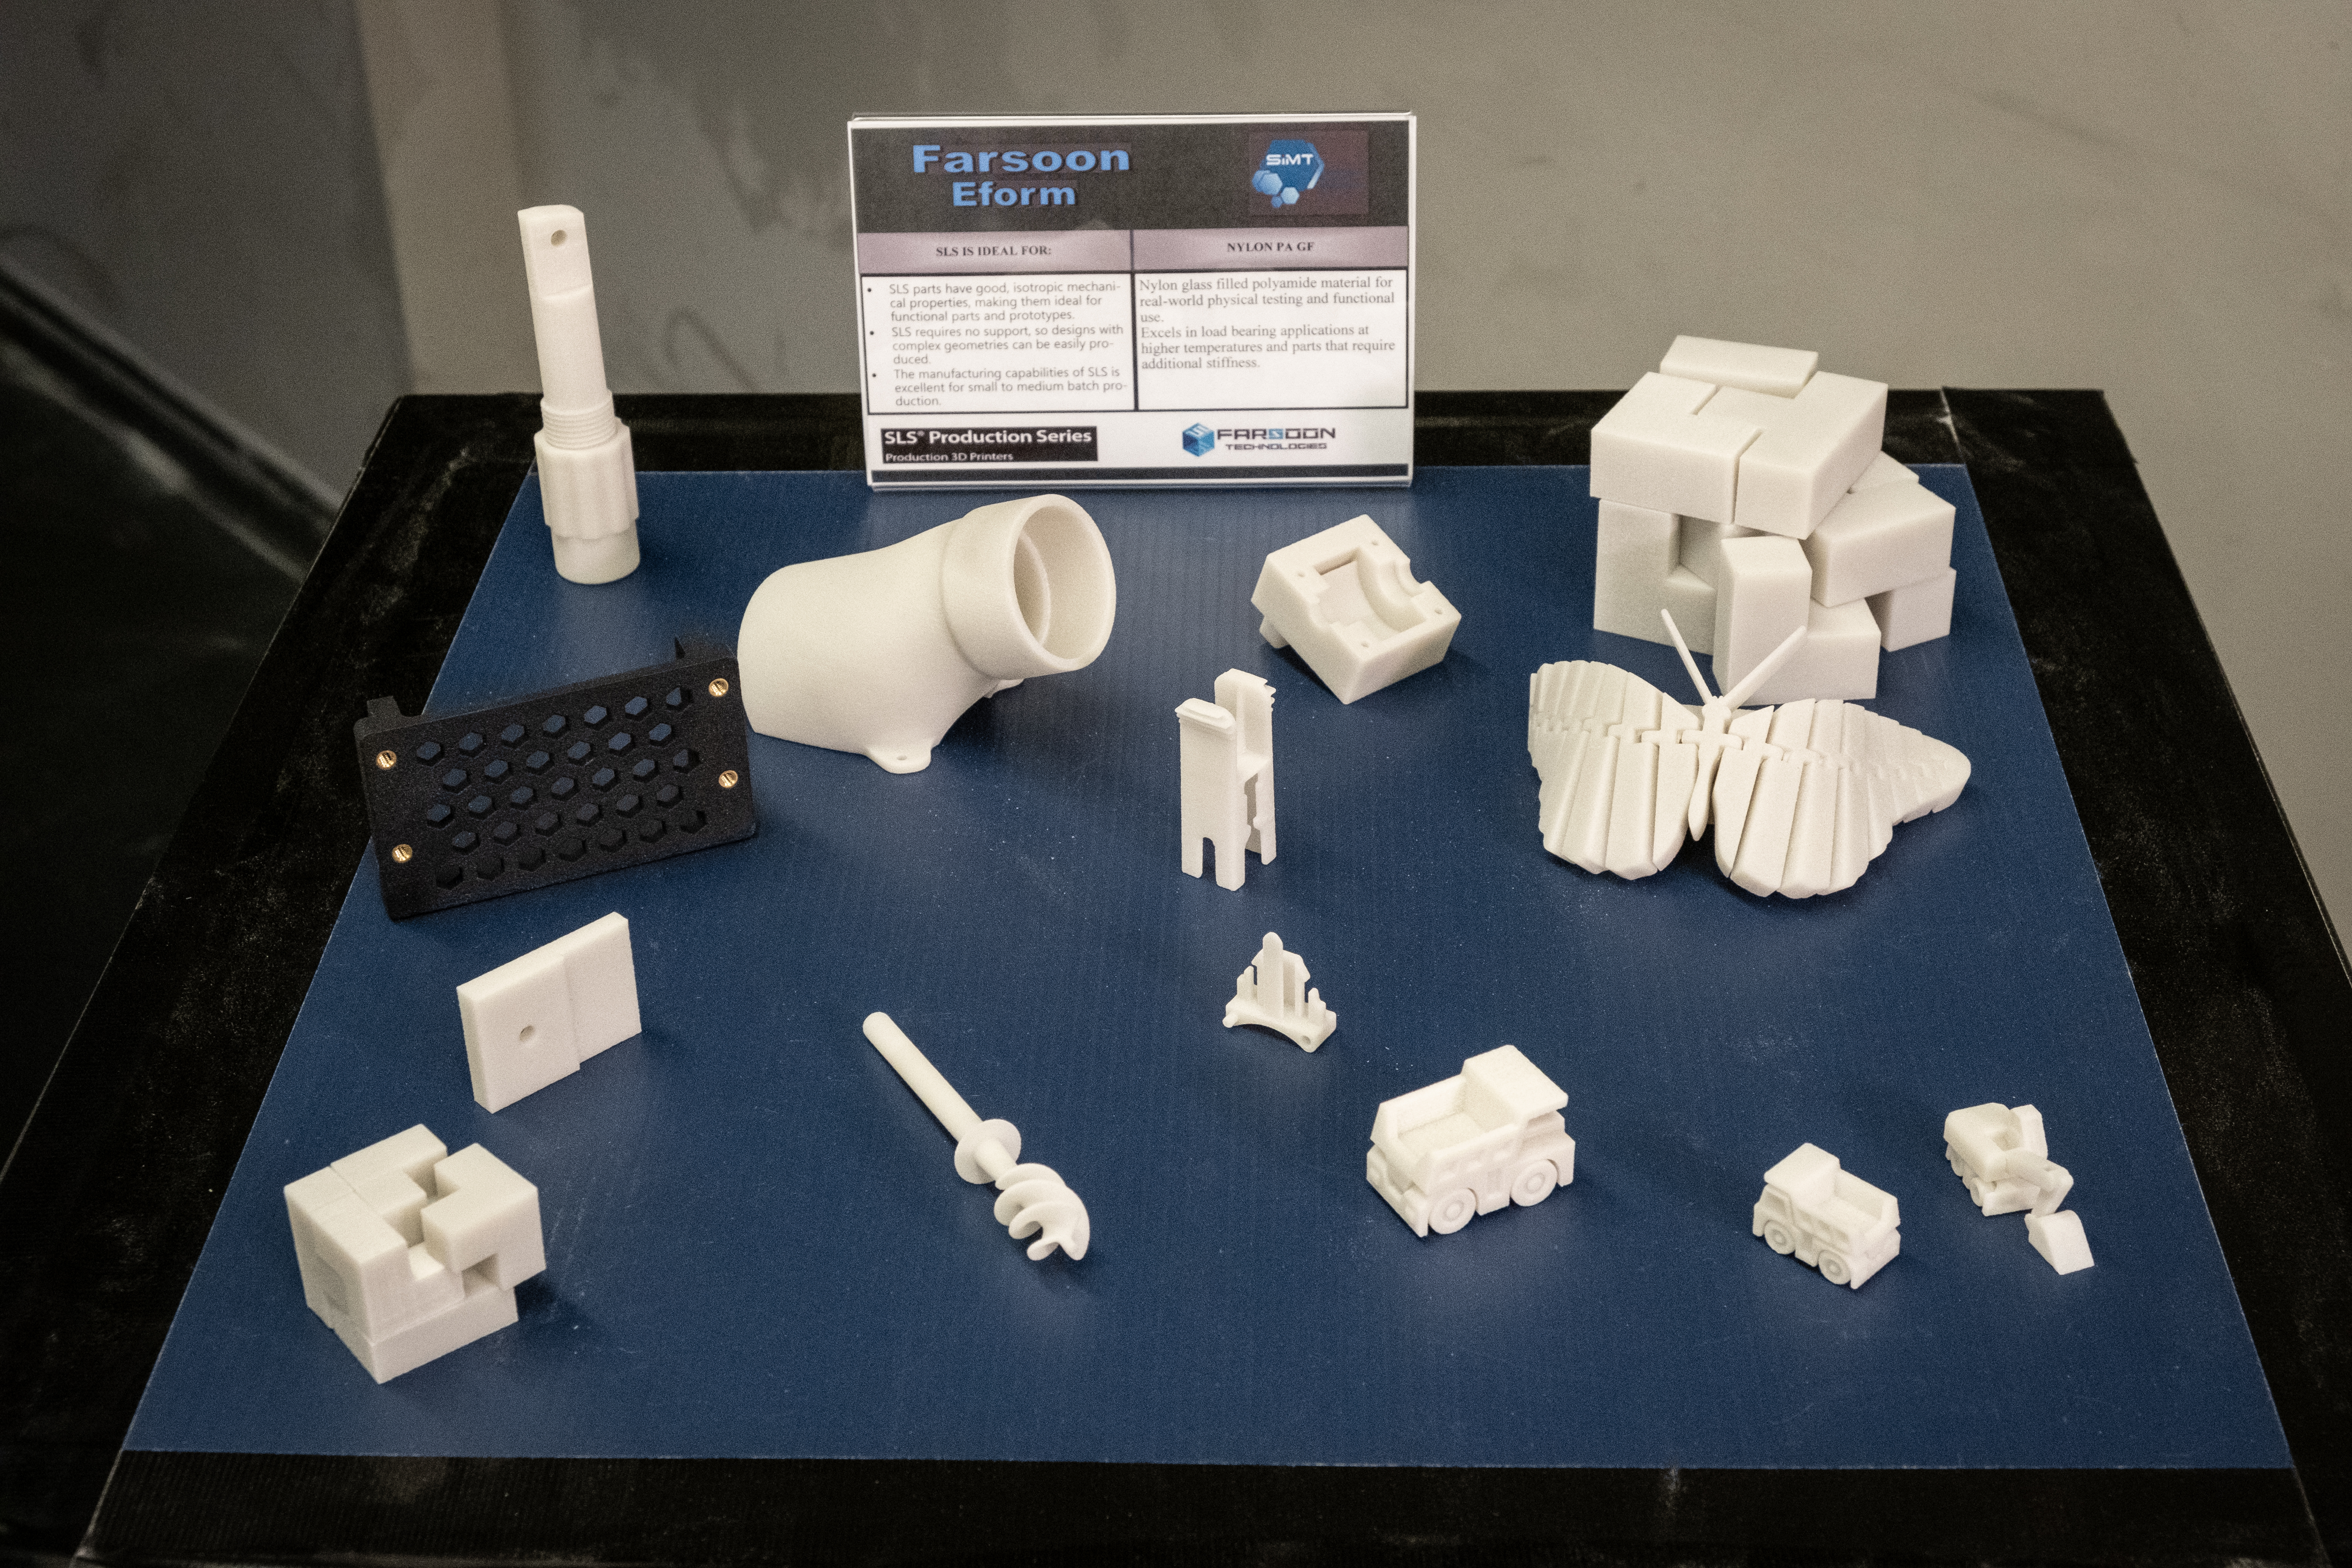 A sampling of 3D printed objects produced by the SiMT's Farsoon Eform printer.